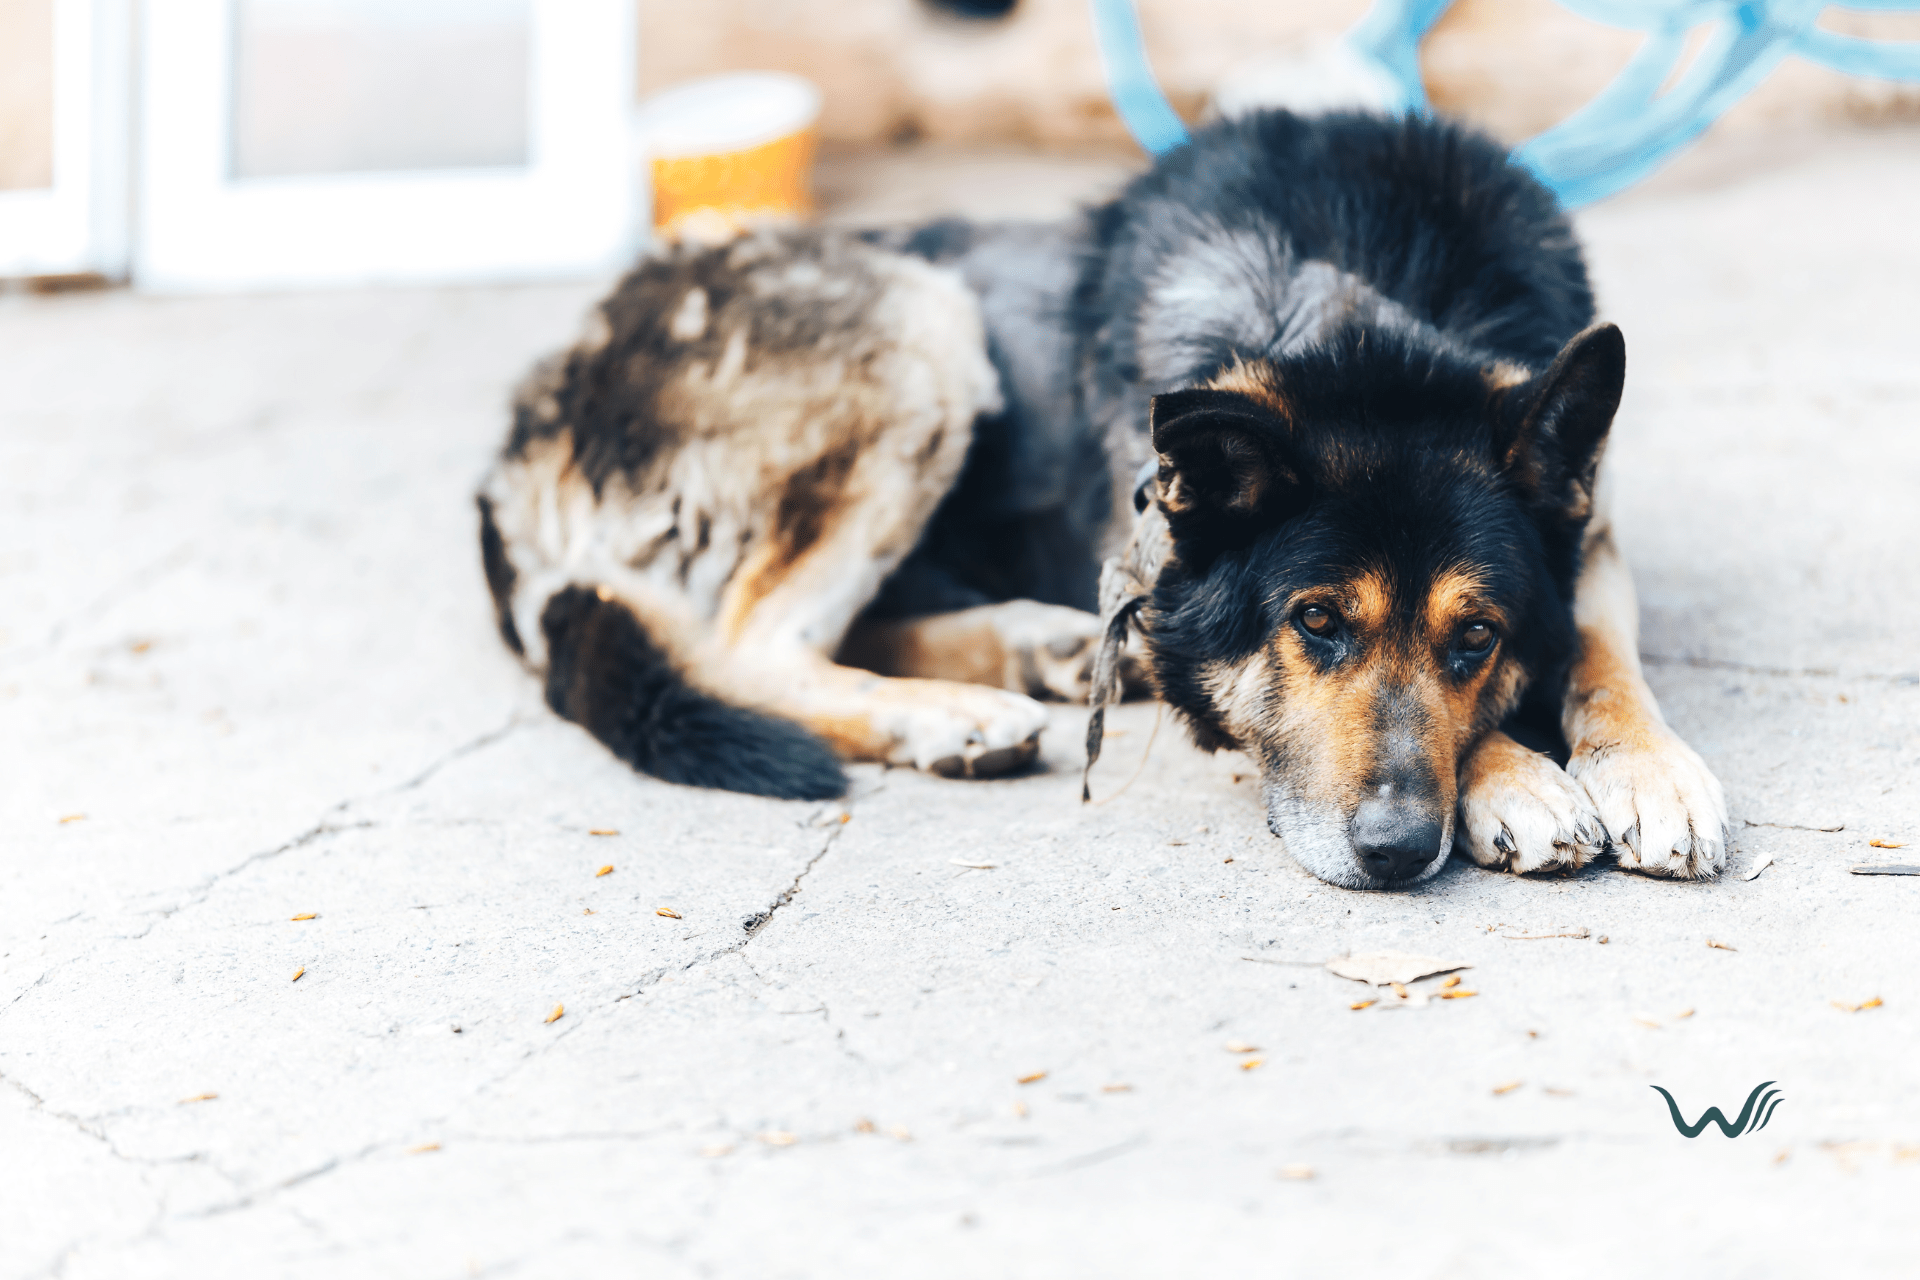 the causes and treatment for mange on dogs